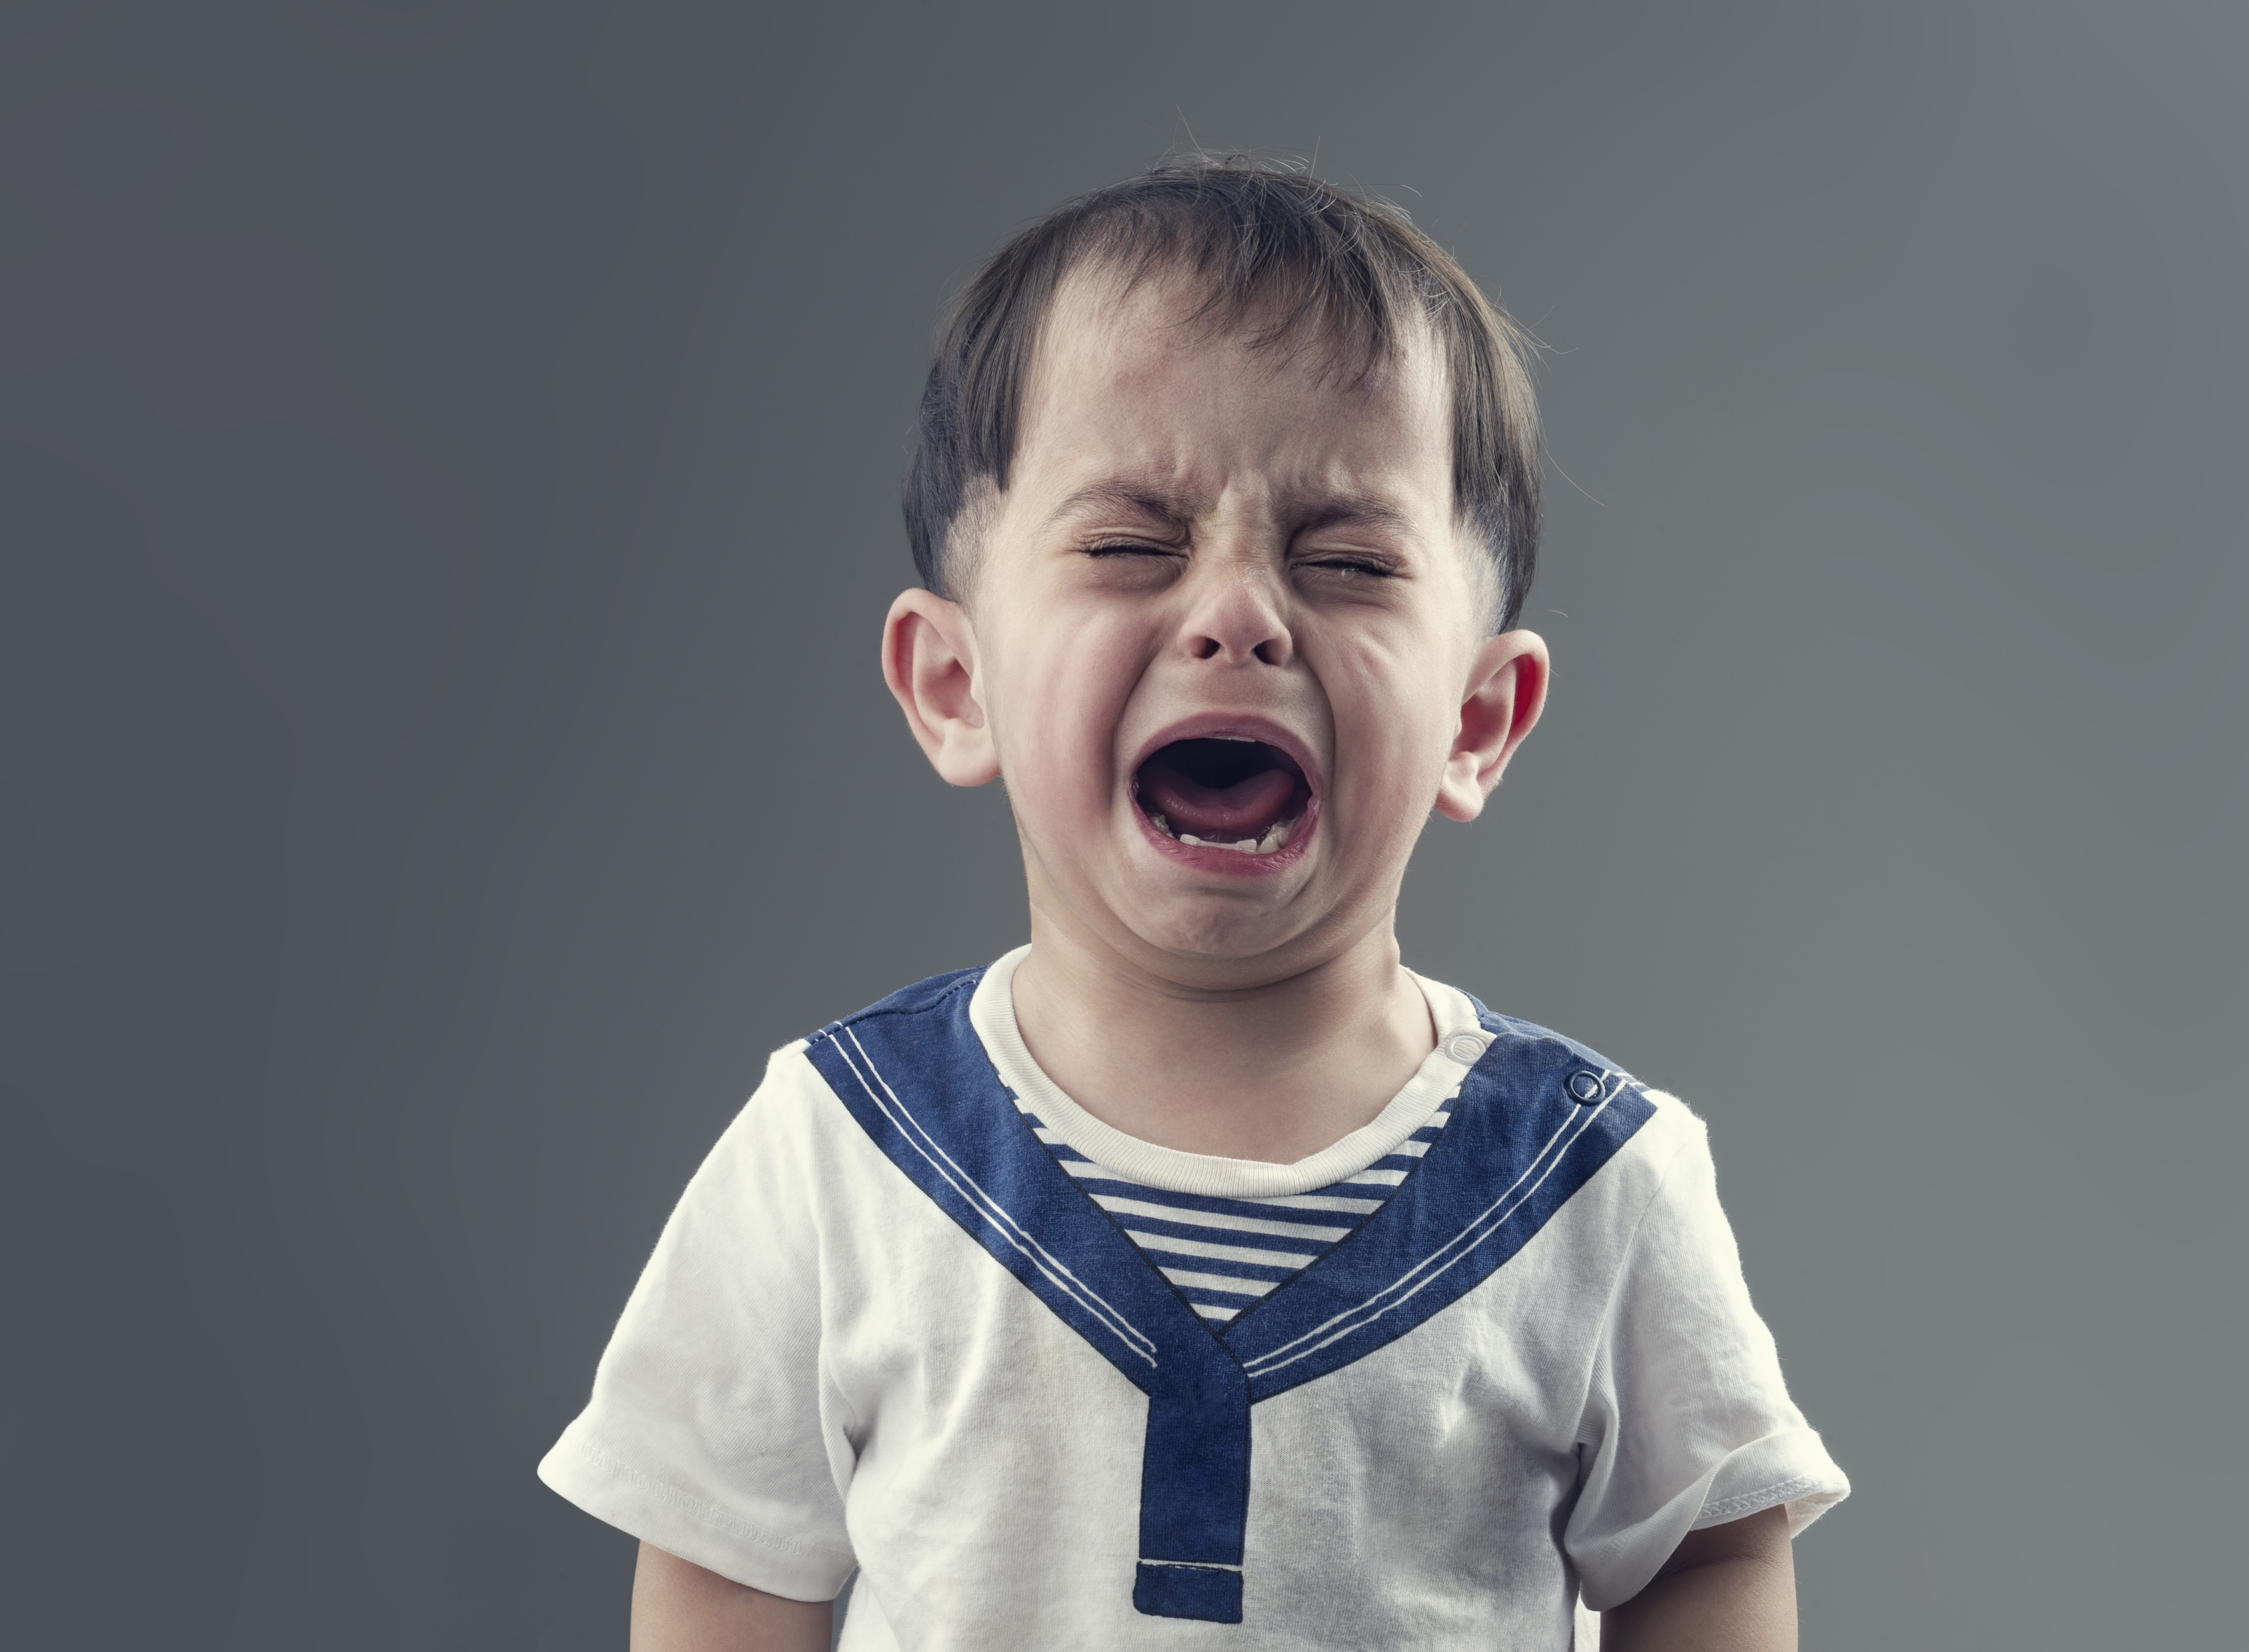 Parenting: Things to do to handle baby tantrums